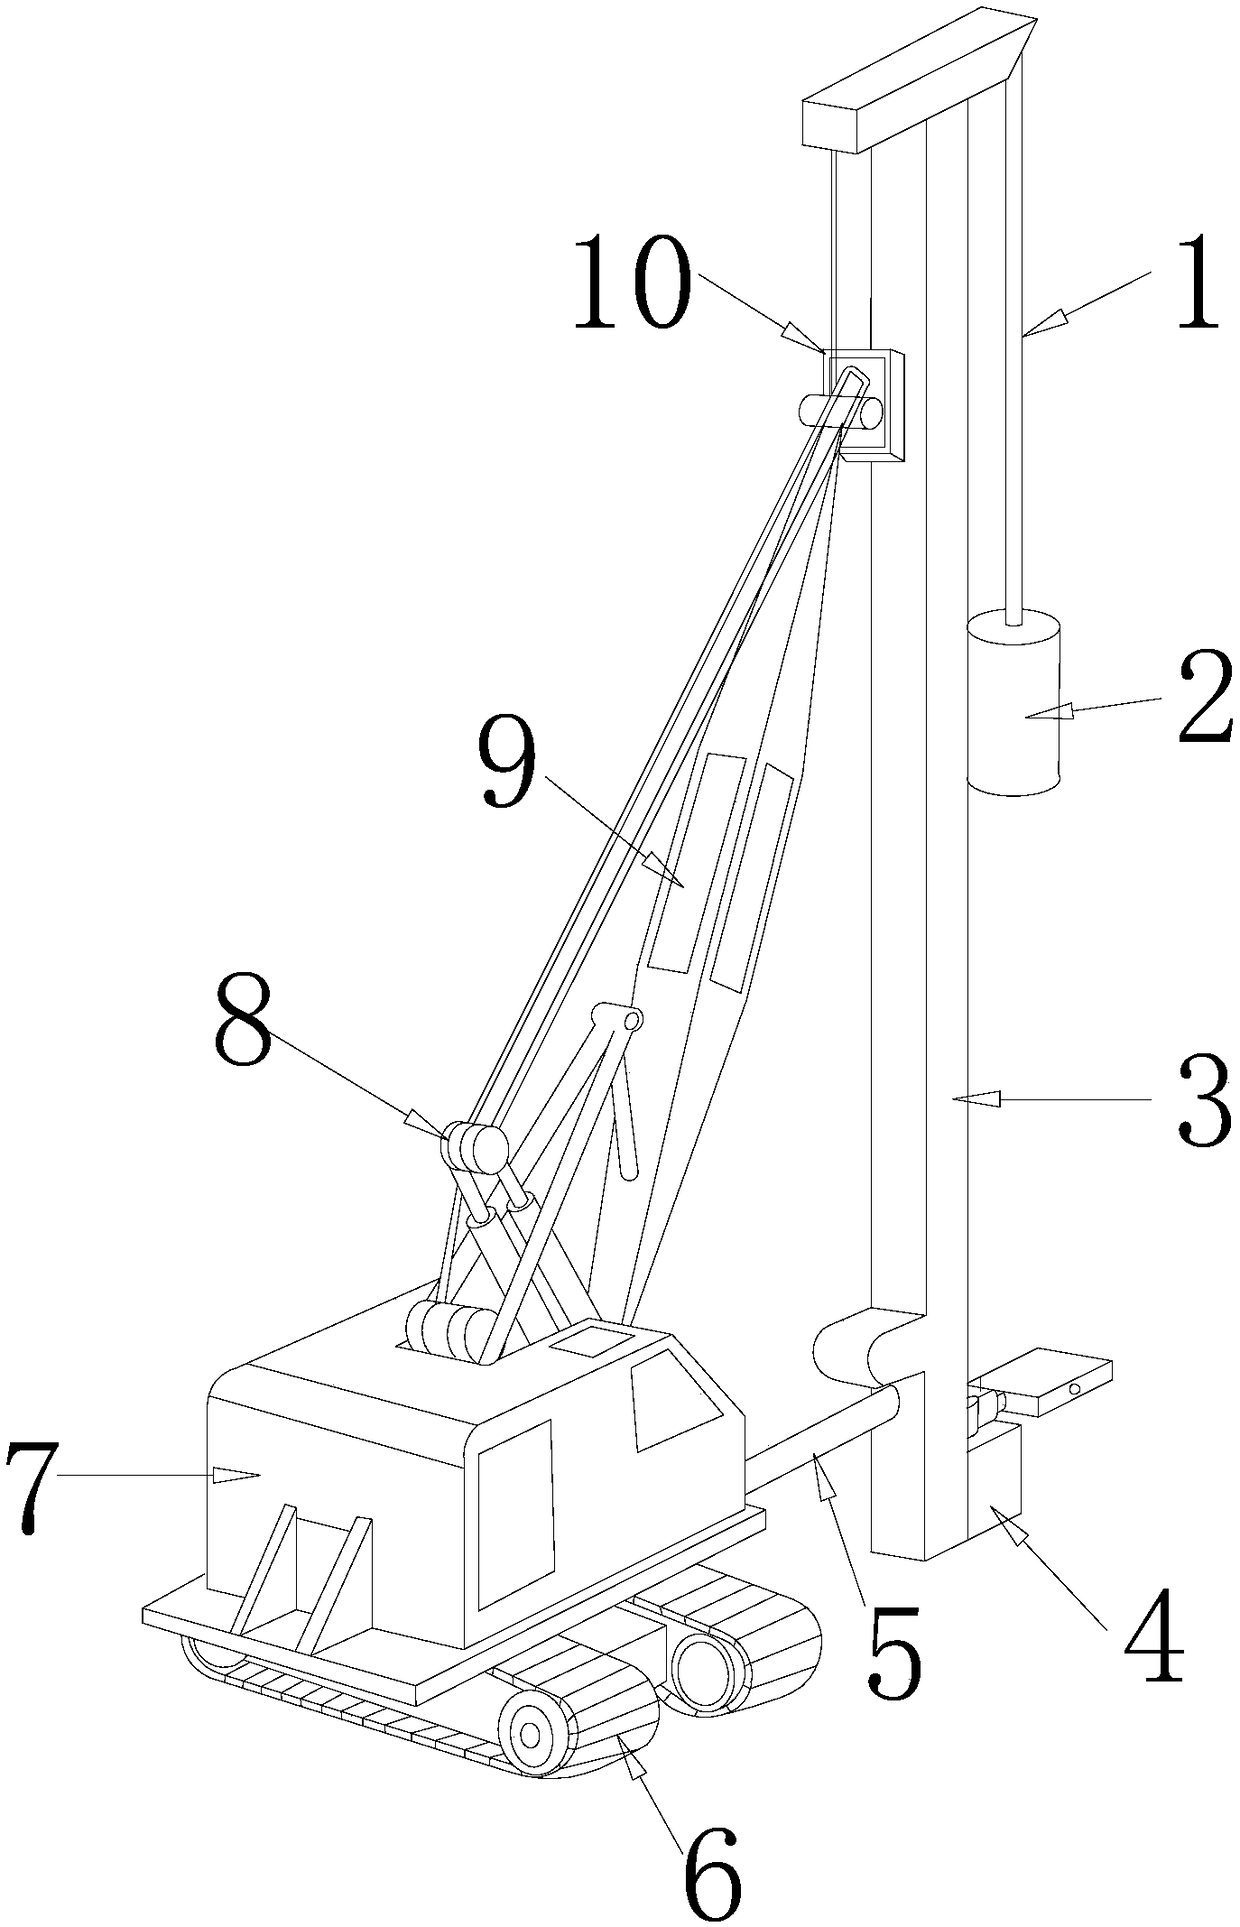 Efficient pile driving apparatus for road construction